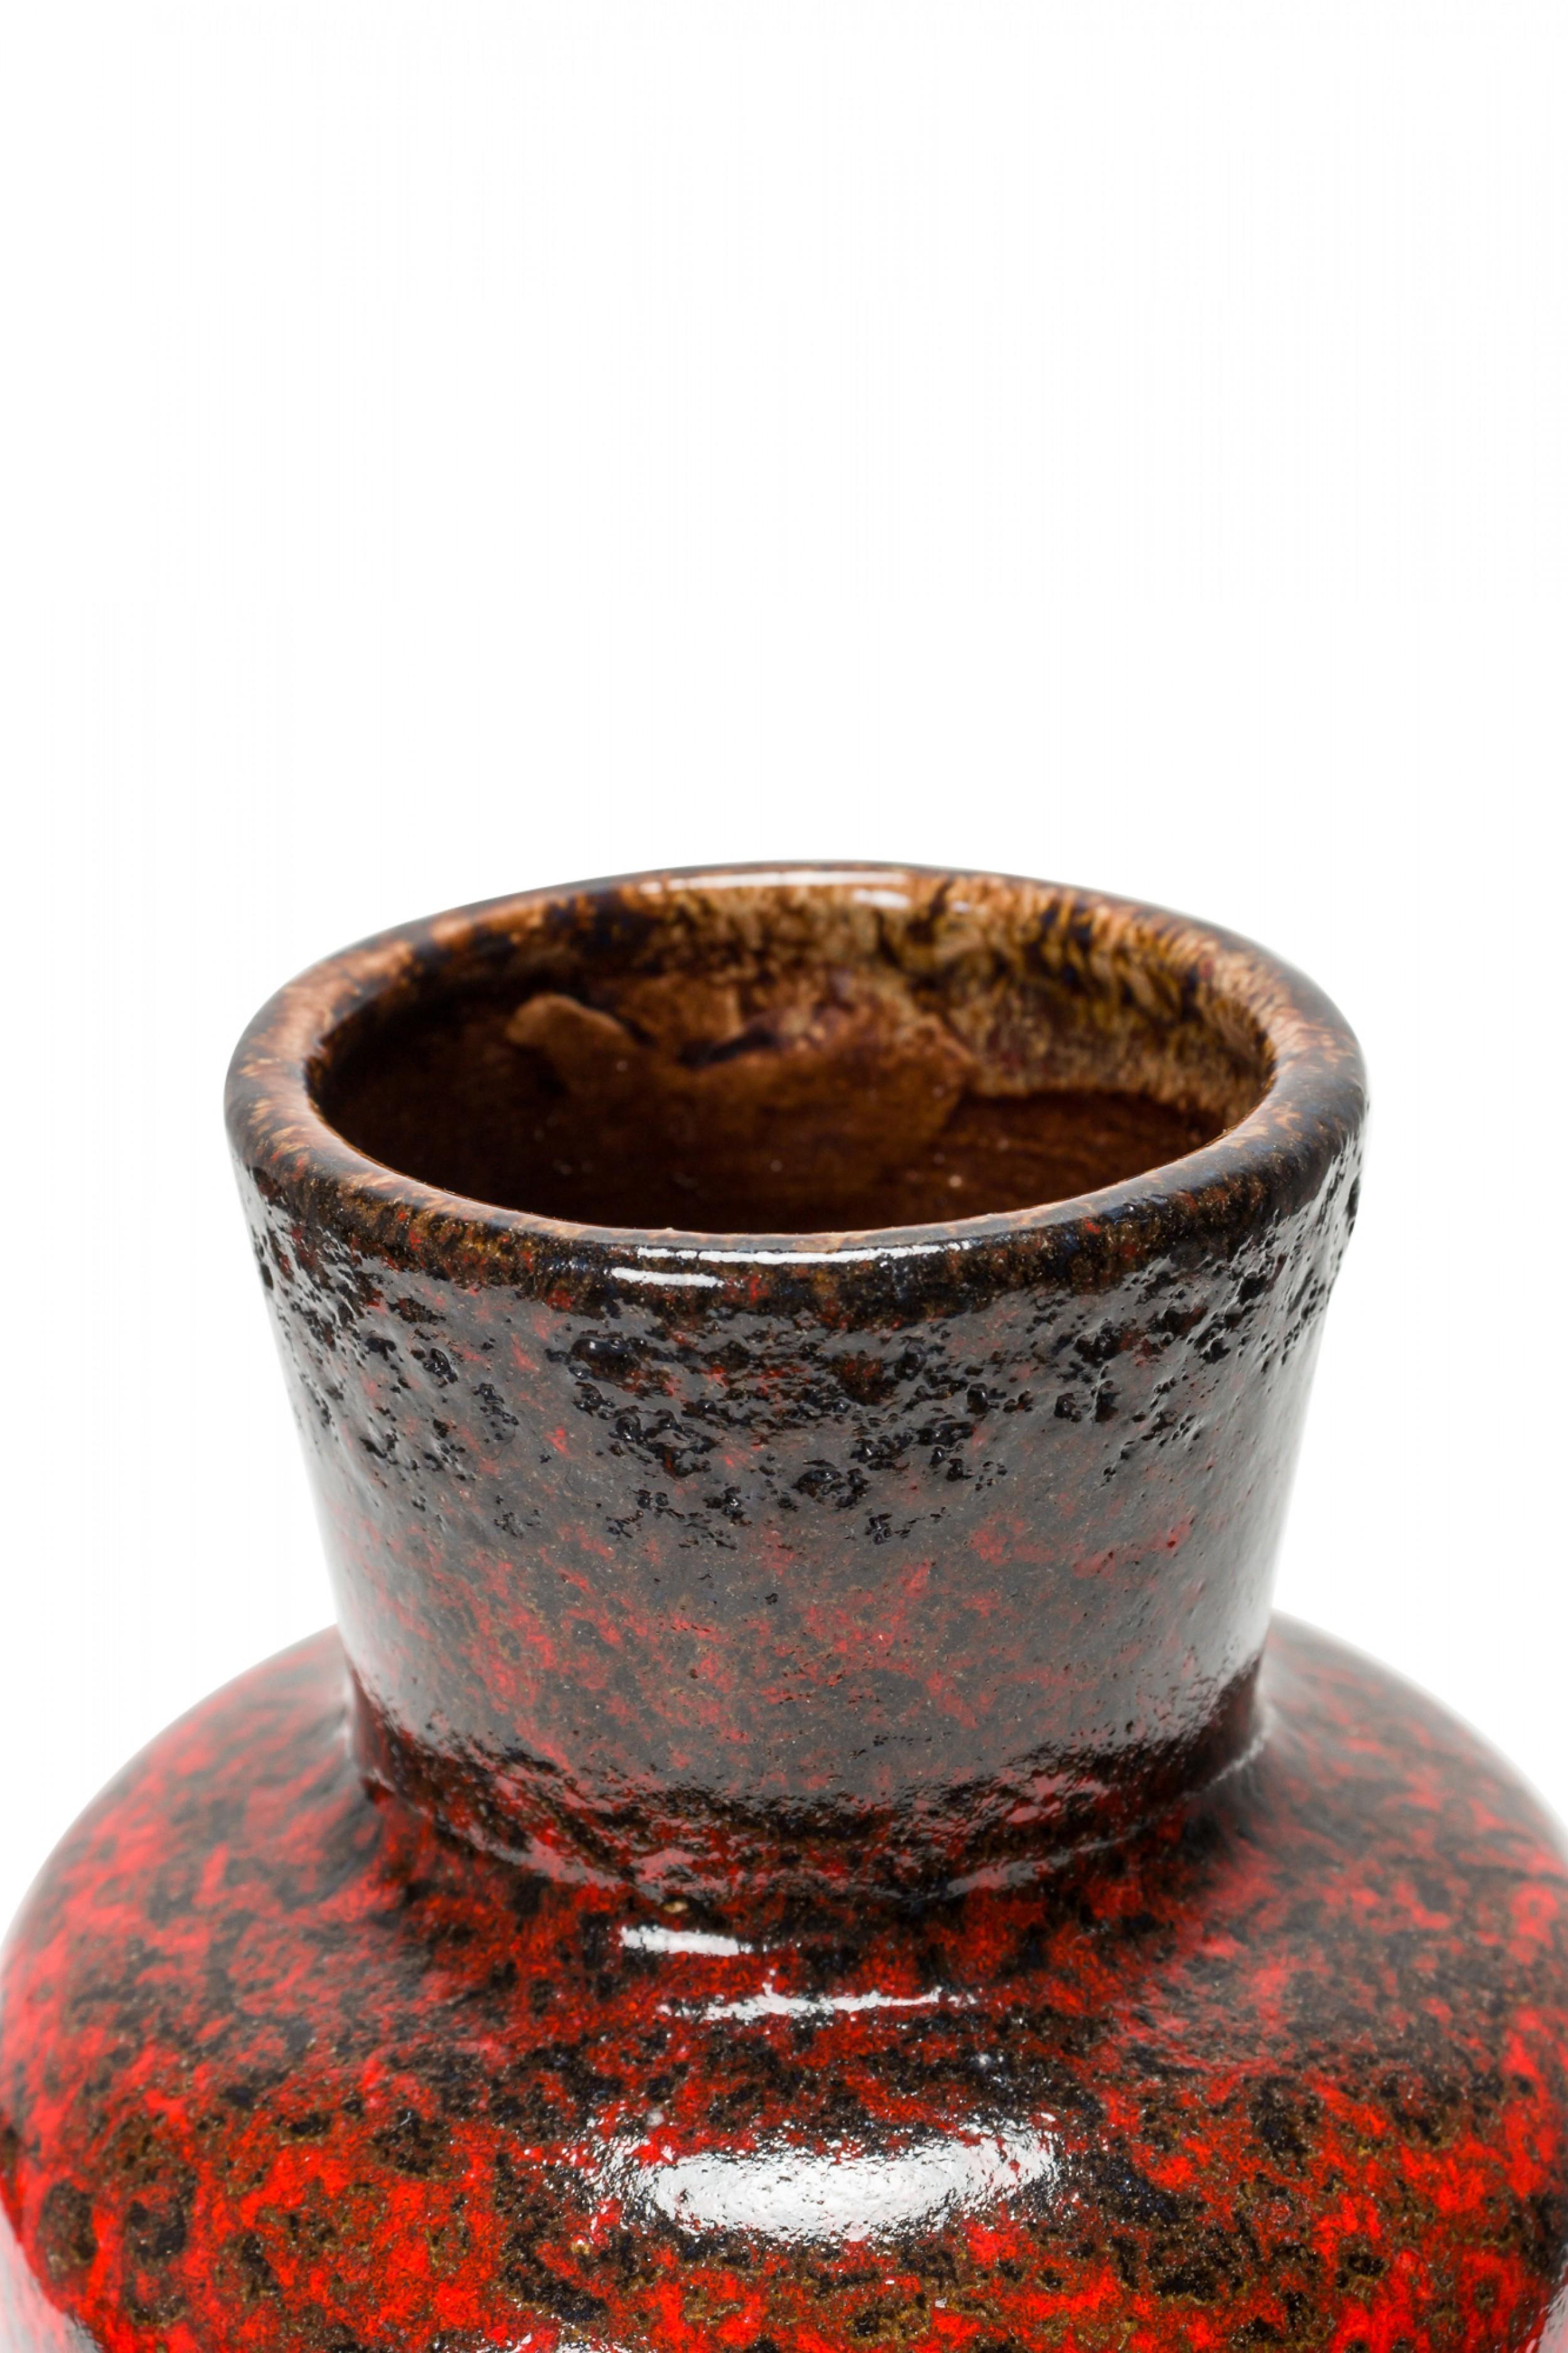 German mid-century ceramic urn-form vase with an extended flared mouth and a red and black fat lava-style glaze.